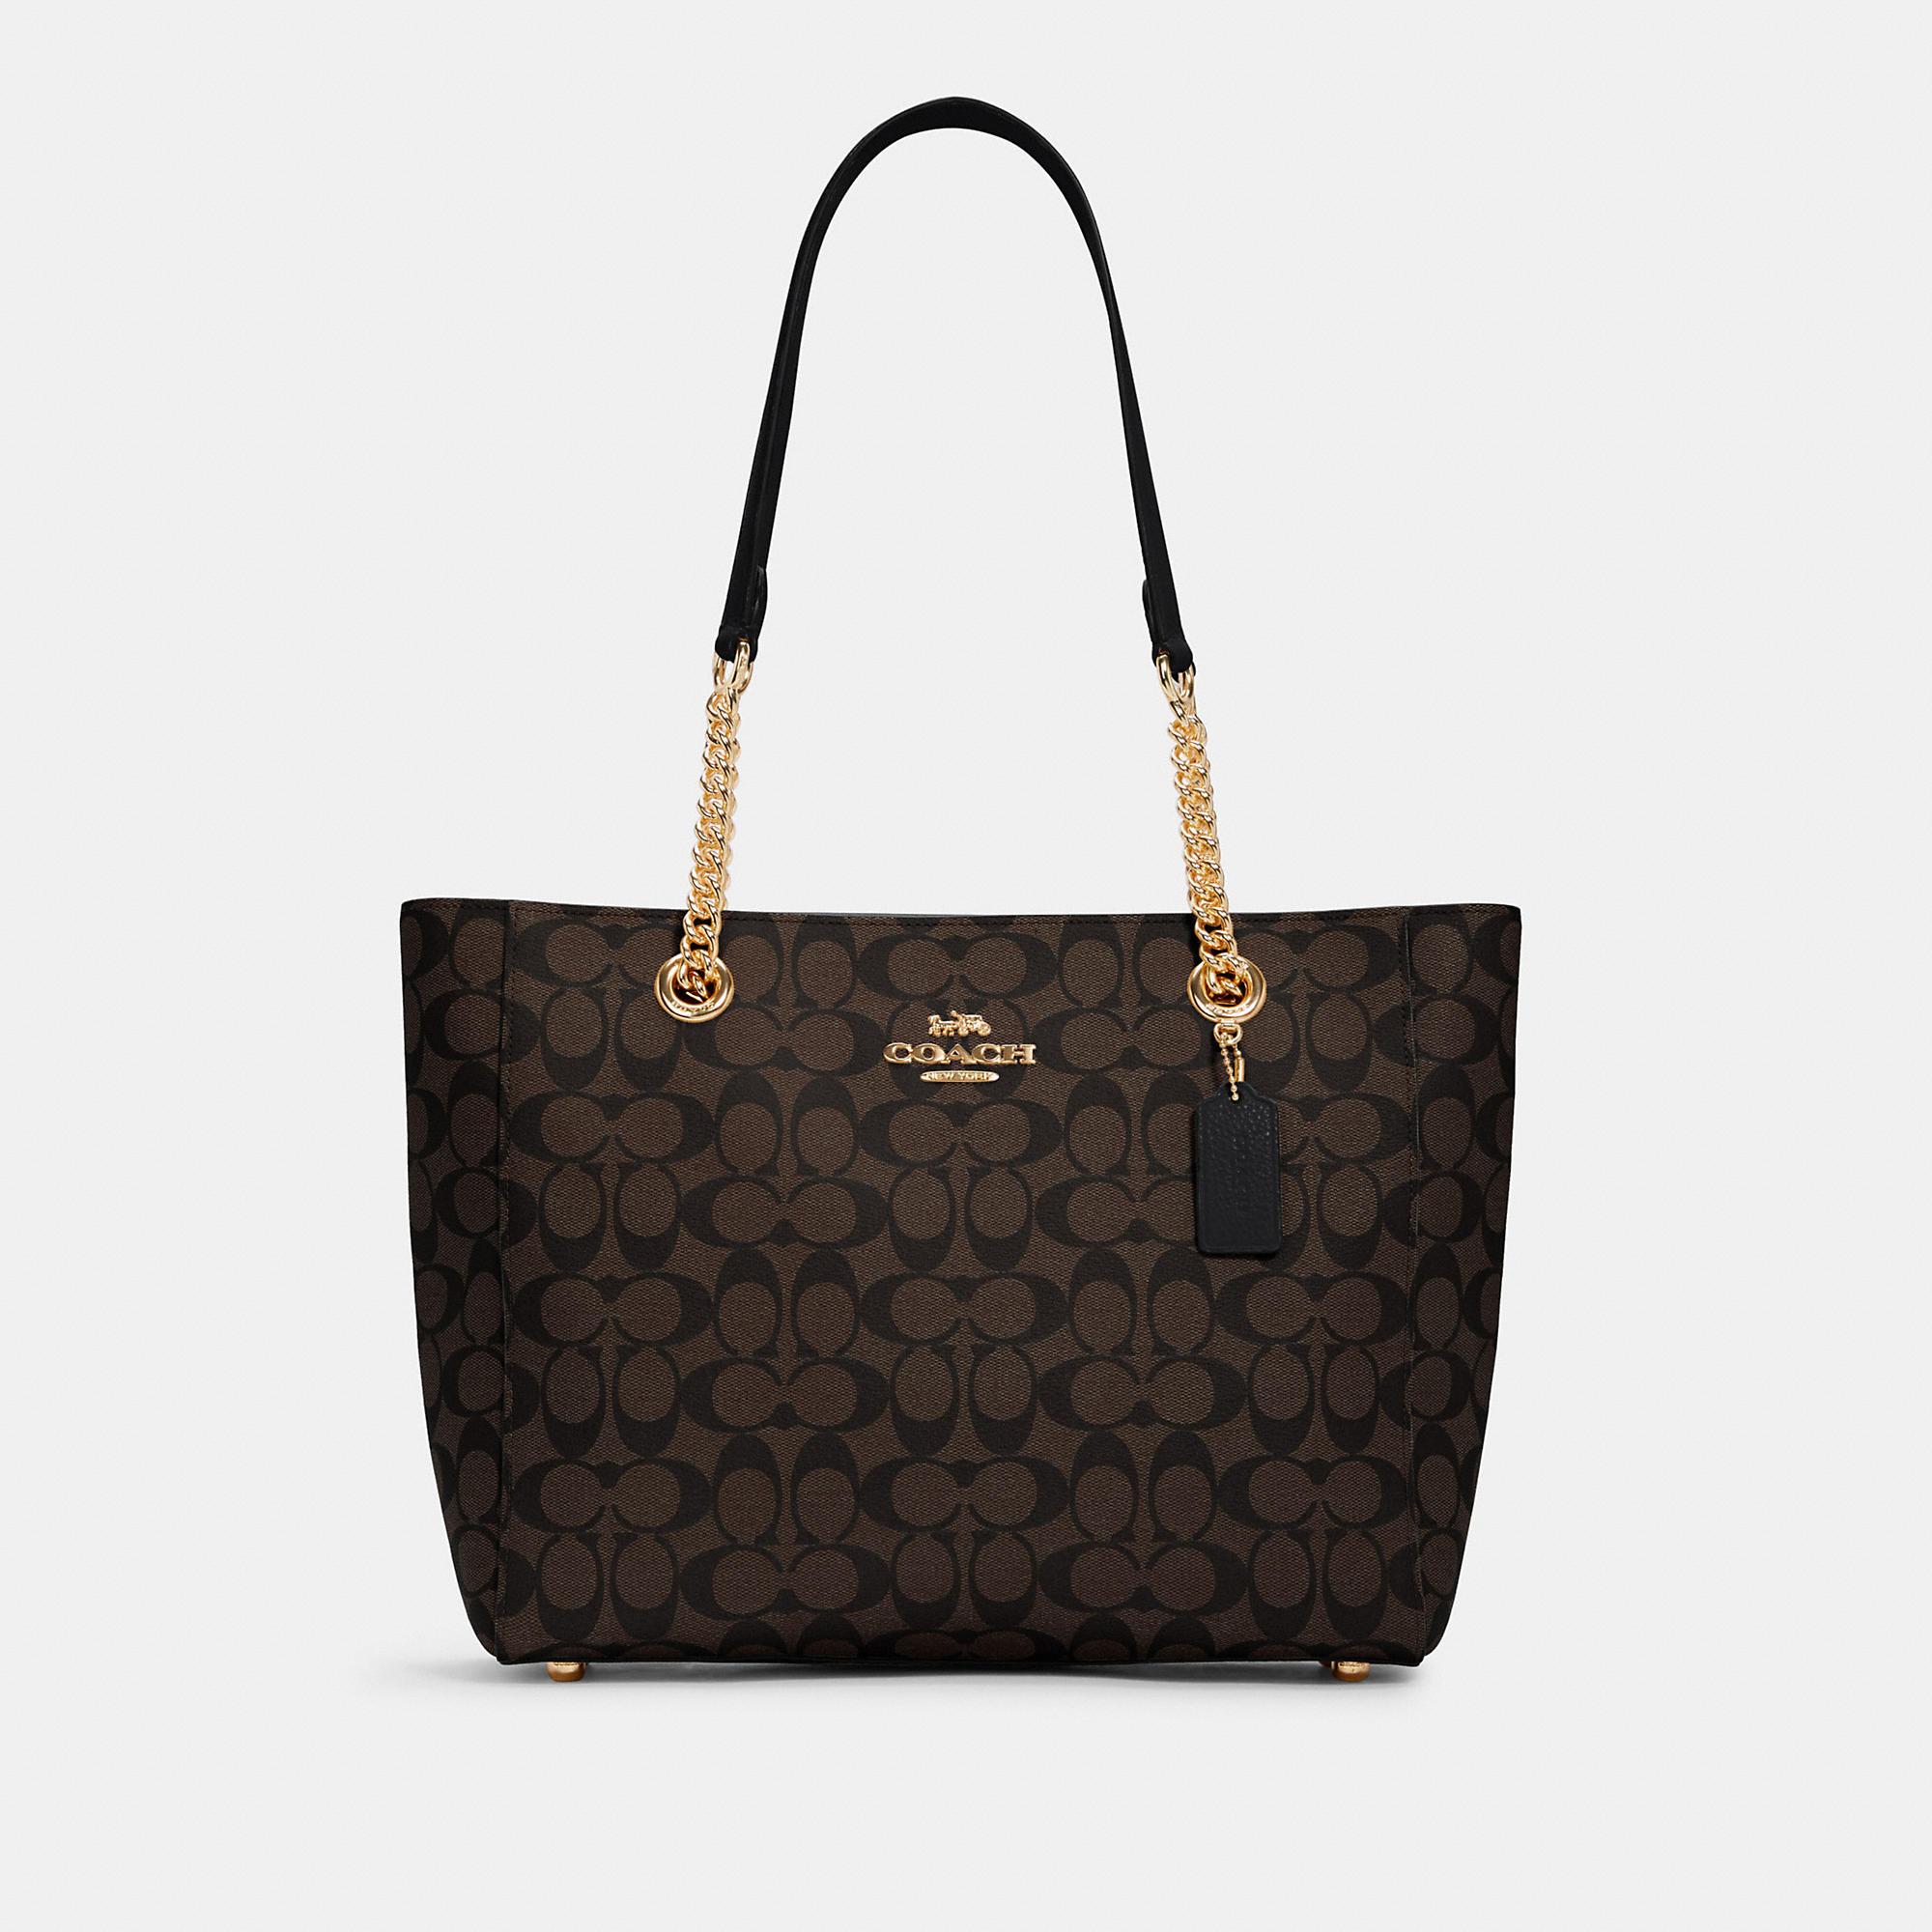 COACH Marlie Tote In Signature Canvas in Black | Lyst